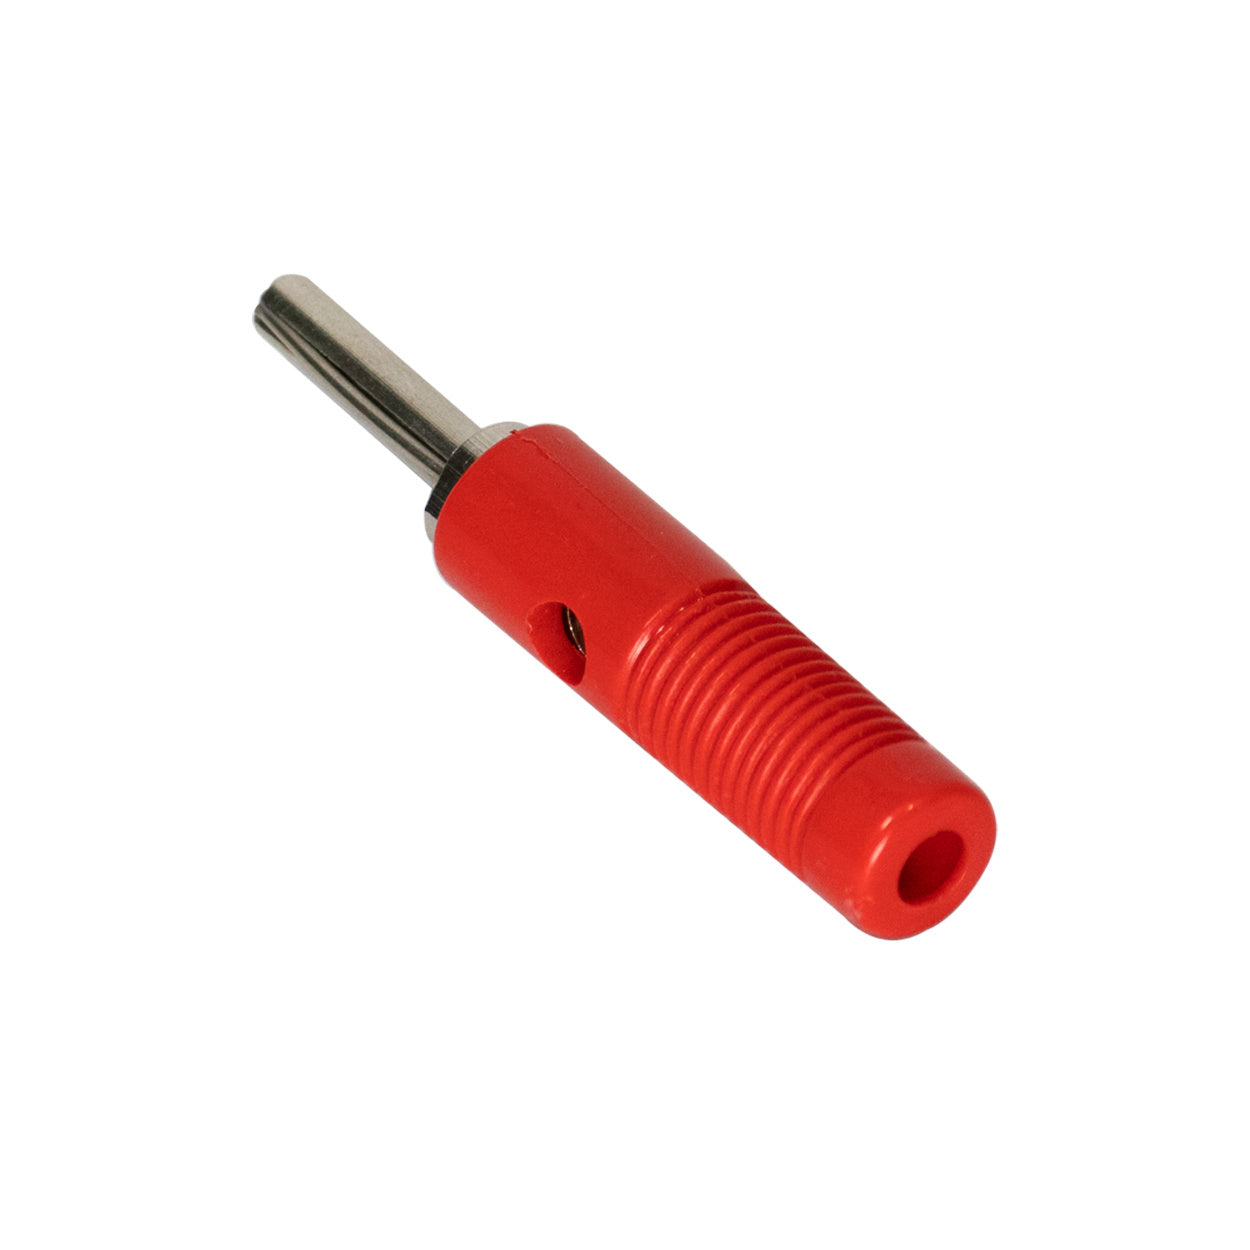 4mm Banana Plugs Audio Speaker Wire Cable terminal Connectors (Red)